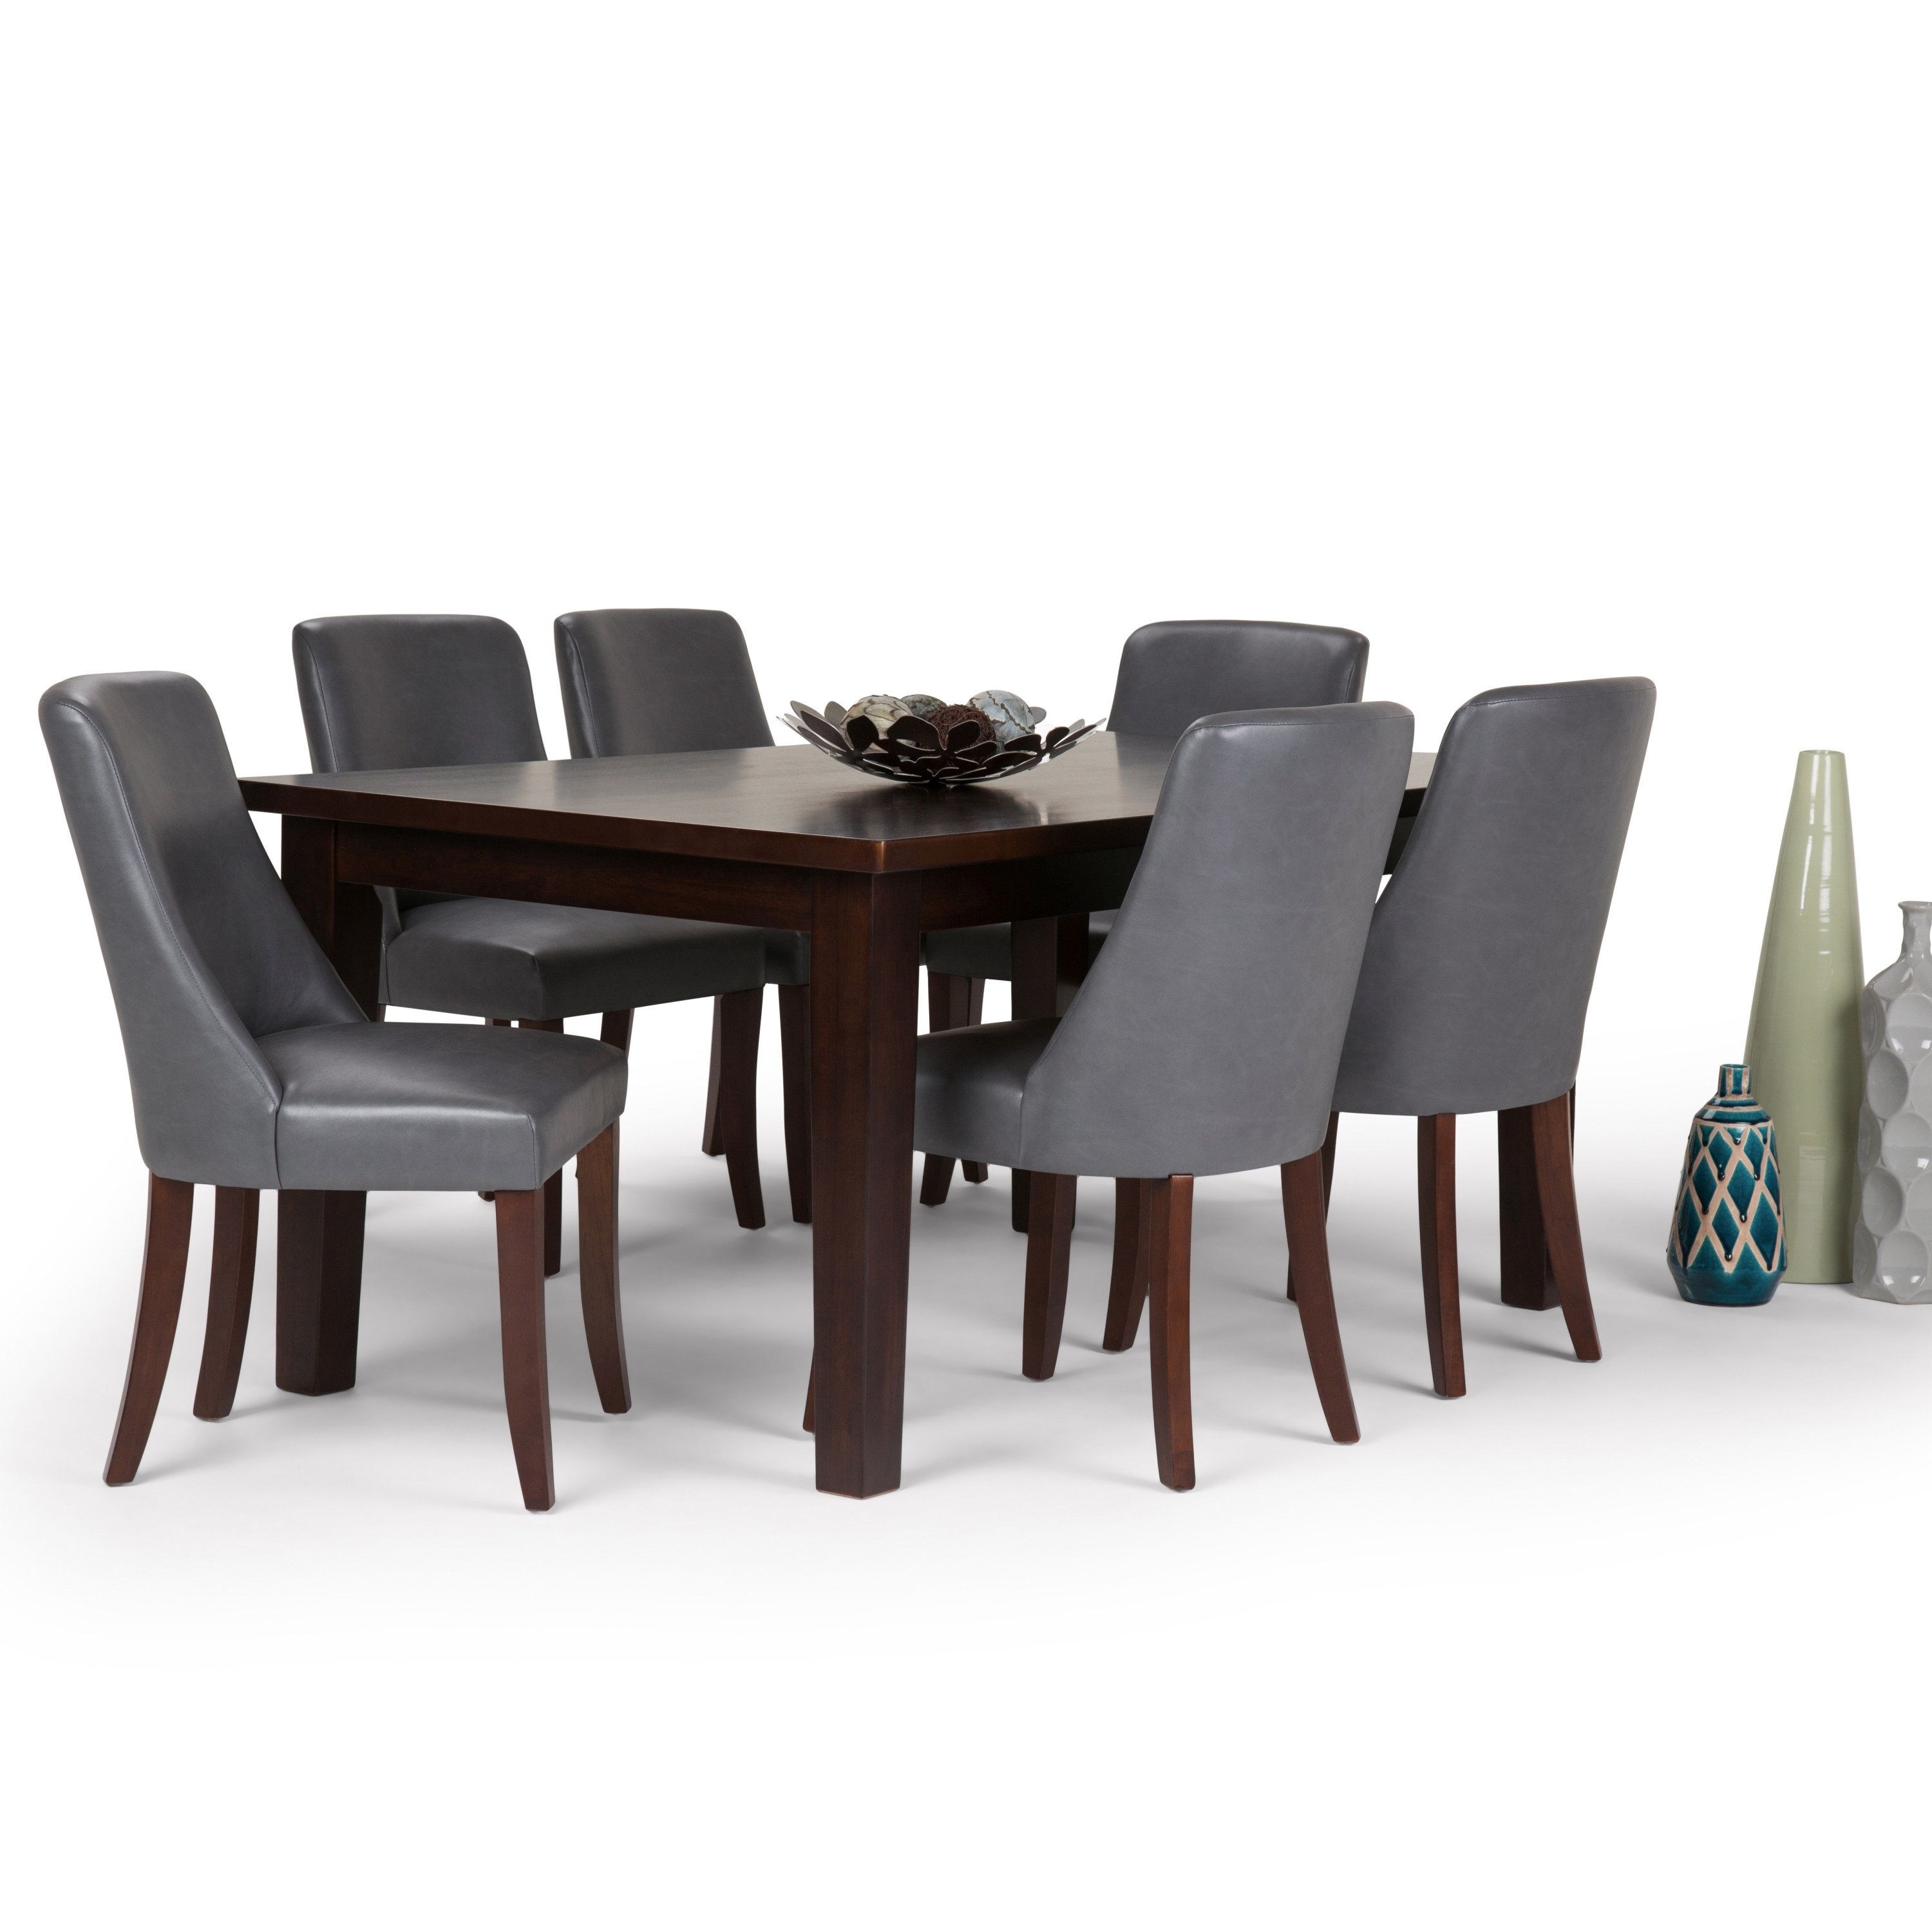 2019 Walden Upholstered Side Chairs In Simpli Home Walden 7 Piece Dining Set (View 16 of 20)